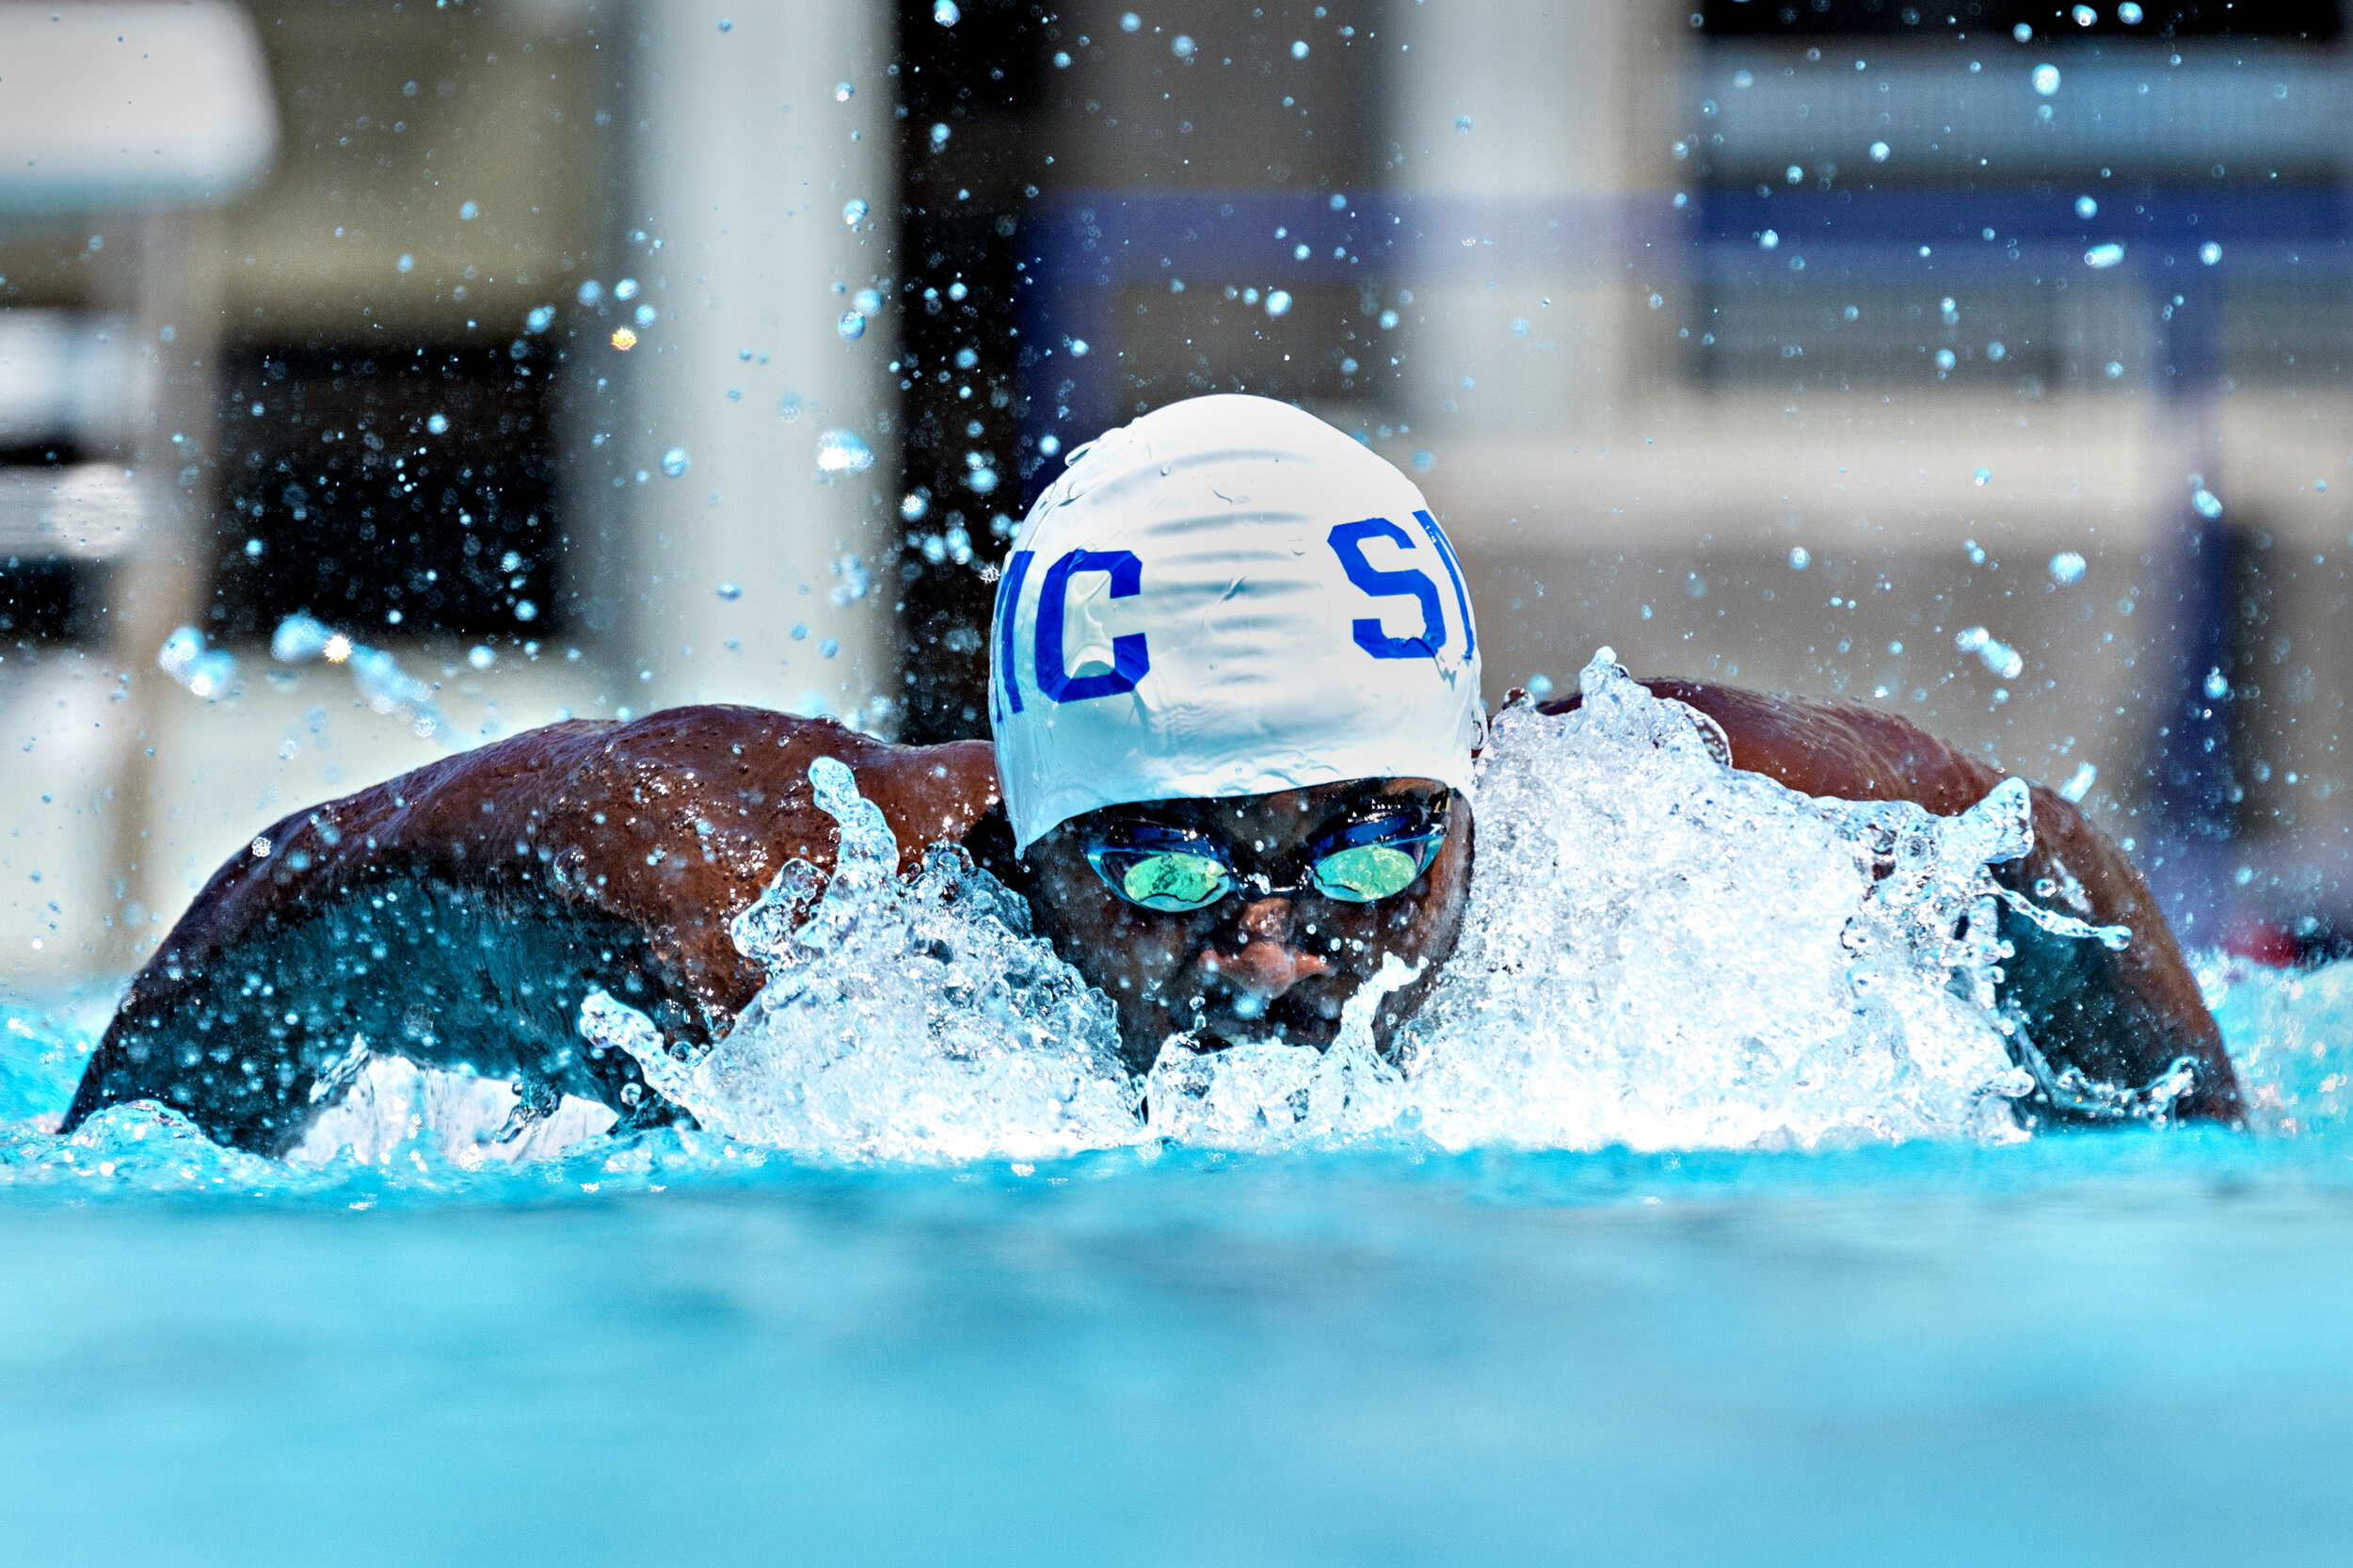  Joshua Smith competes in the 100 yard butterfly at the Santa Monica Swim Center in Santa Monica, California on Friday, April 17, 2021.  It was the SMC's first swim meet since the 2020 season was cancelled due to the COVID-19 pandemic. 